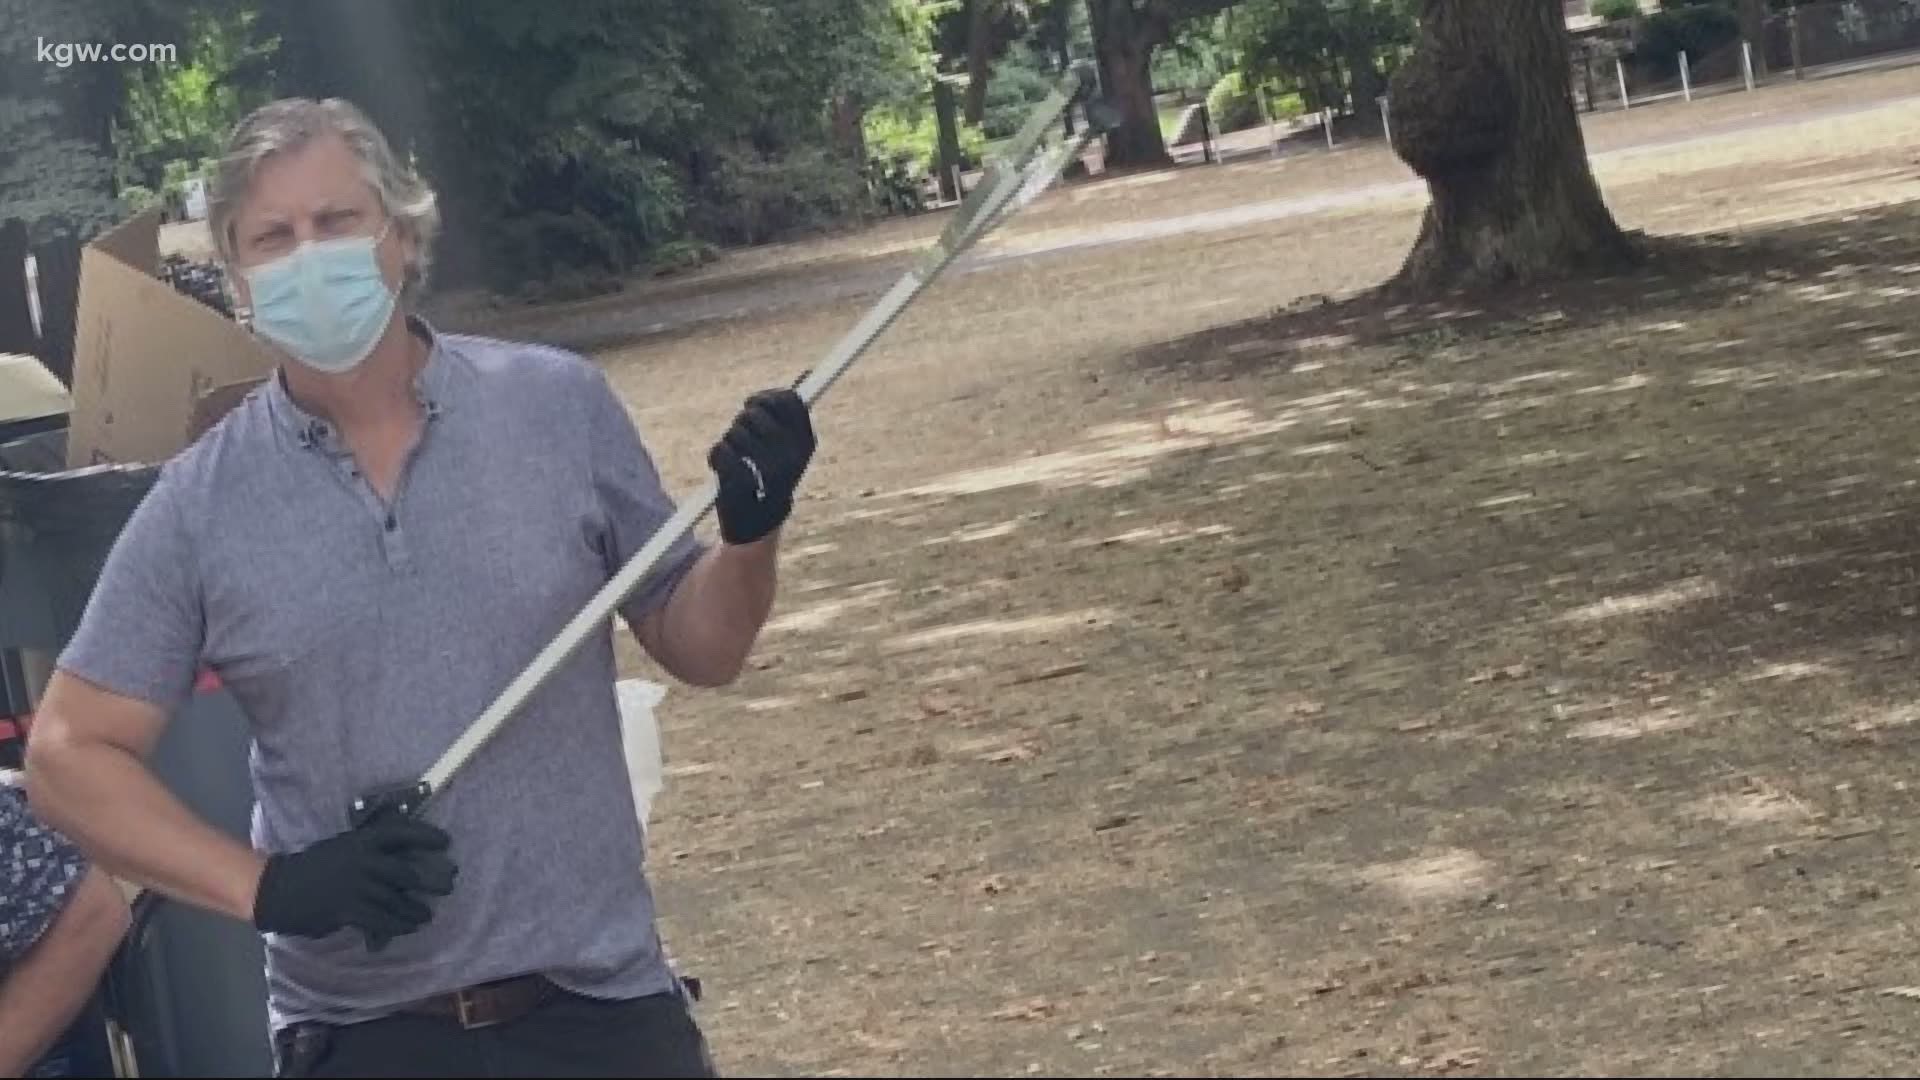 Three brothers have taken it upon themselves to clean up some of Portland's parks.